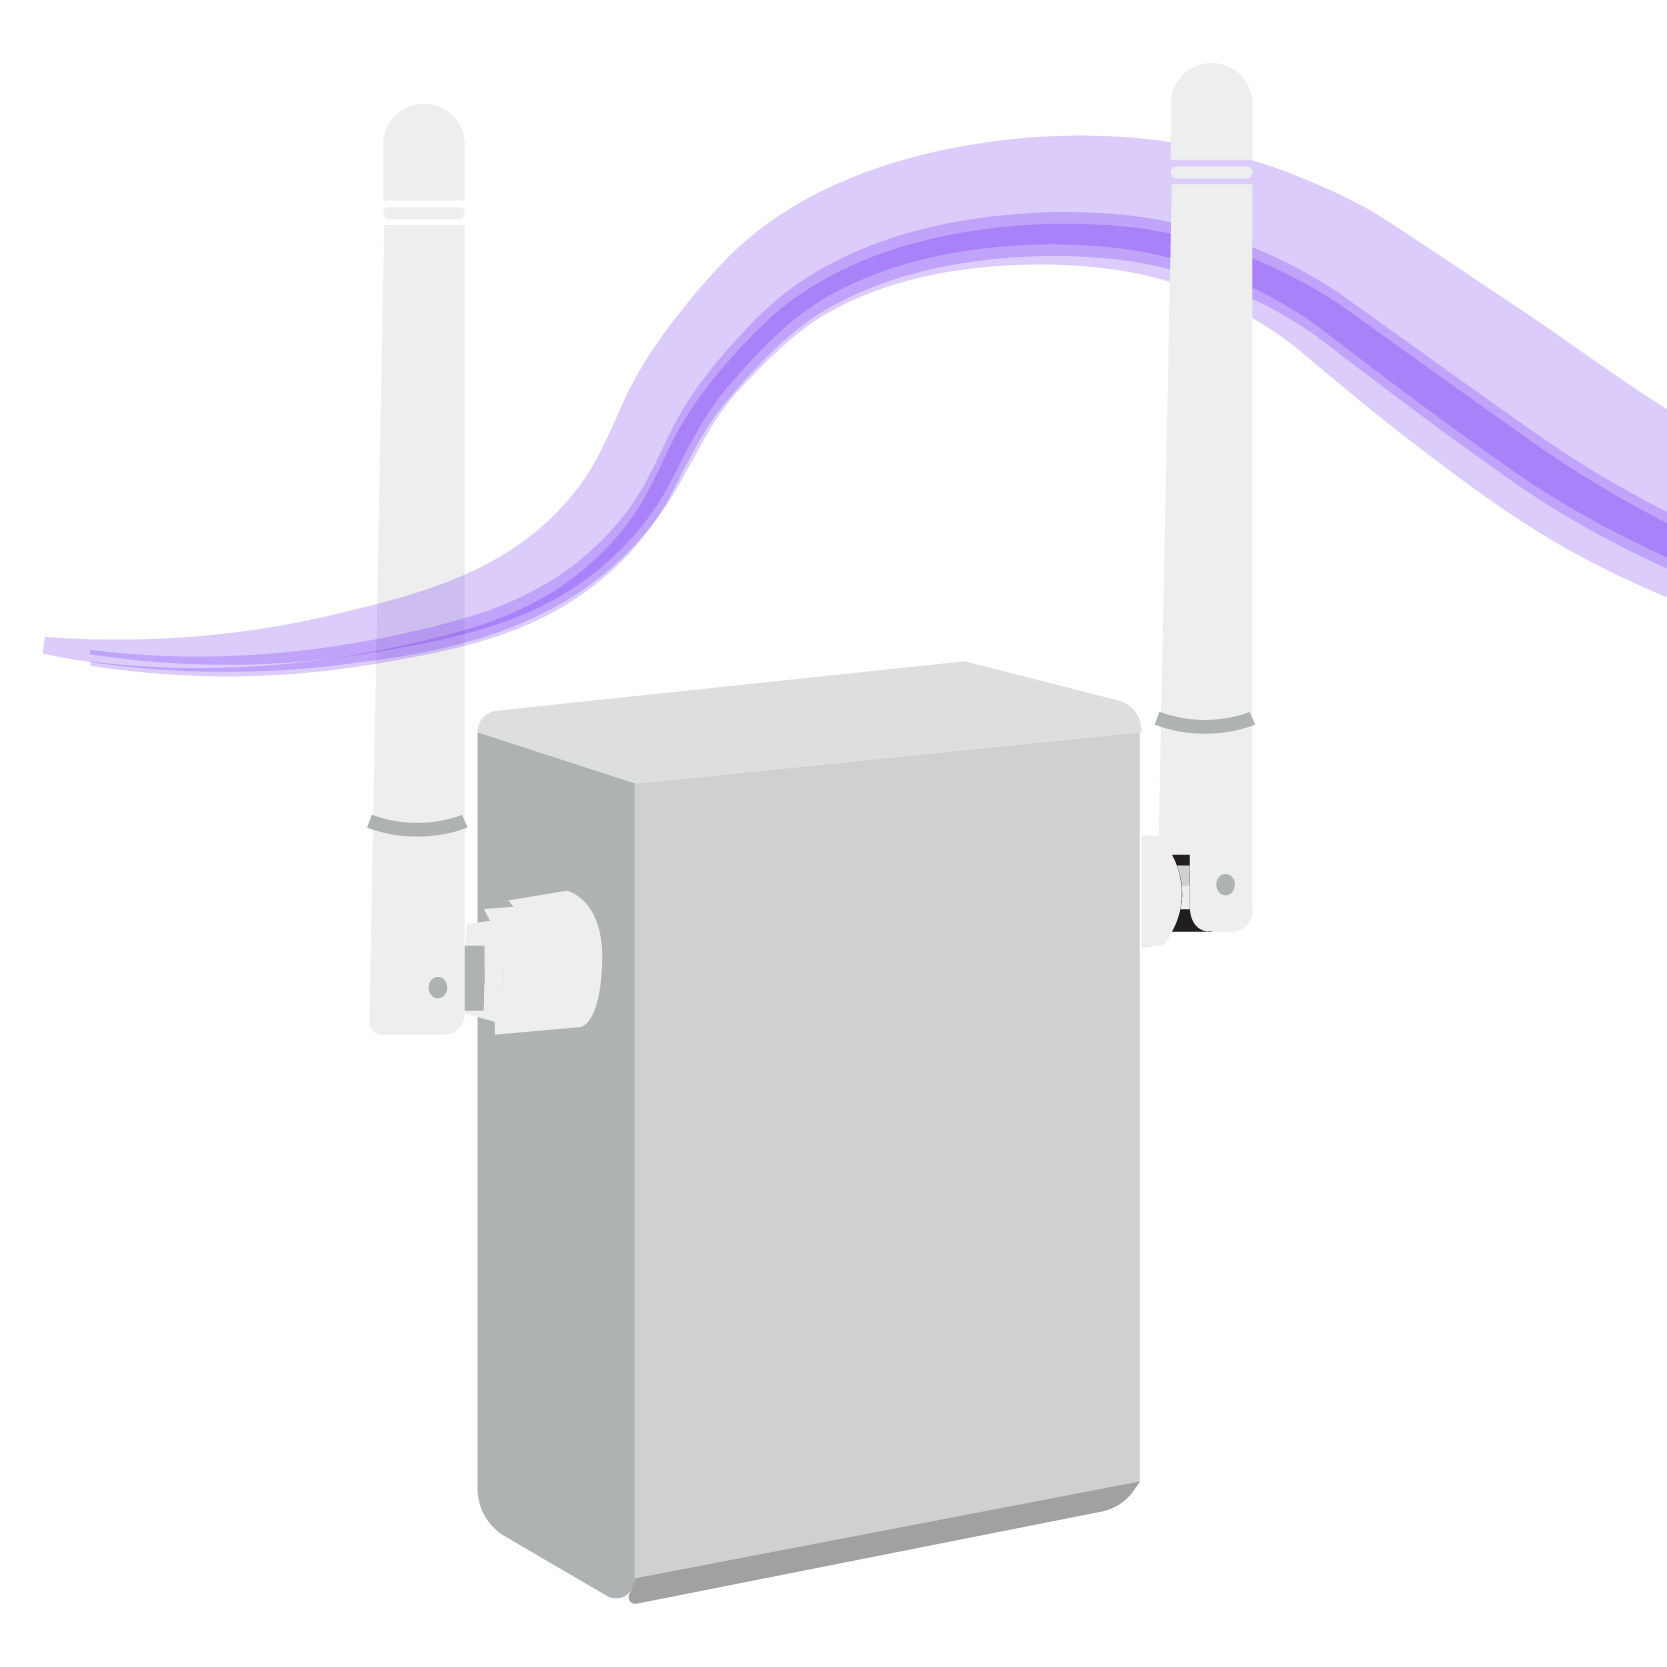 Router graphic